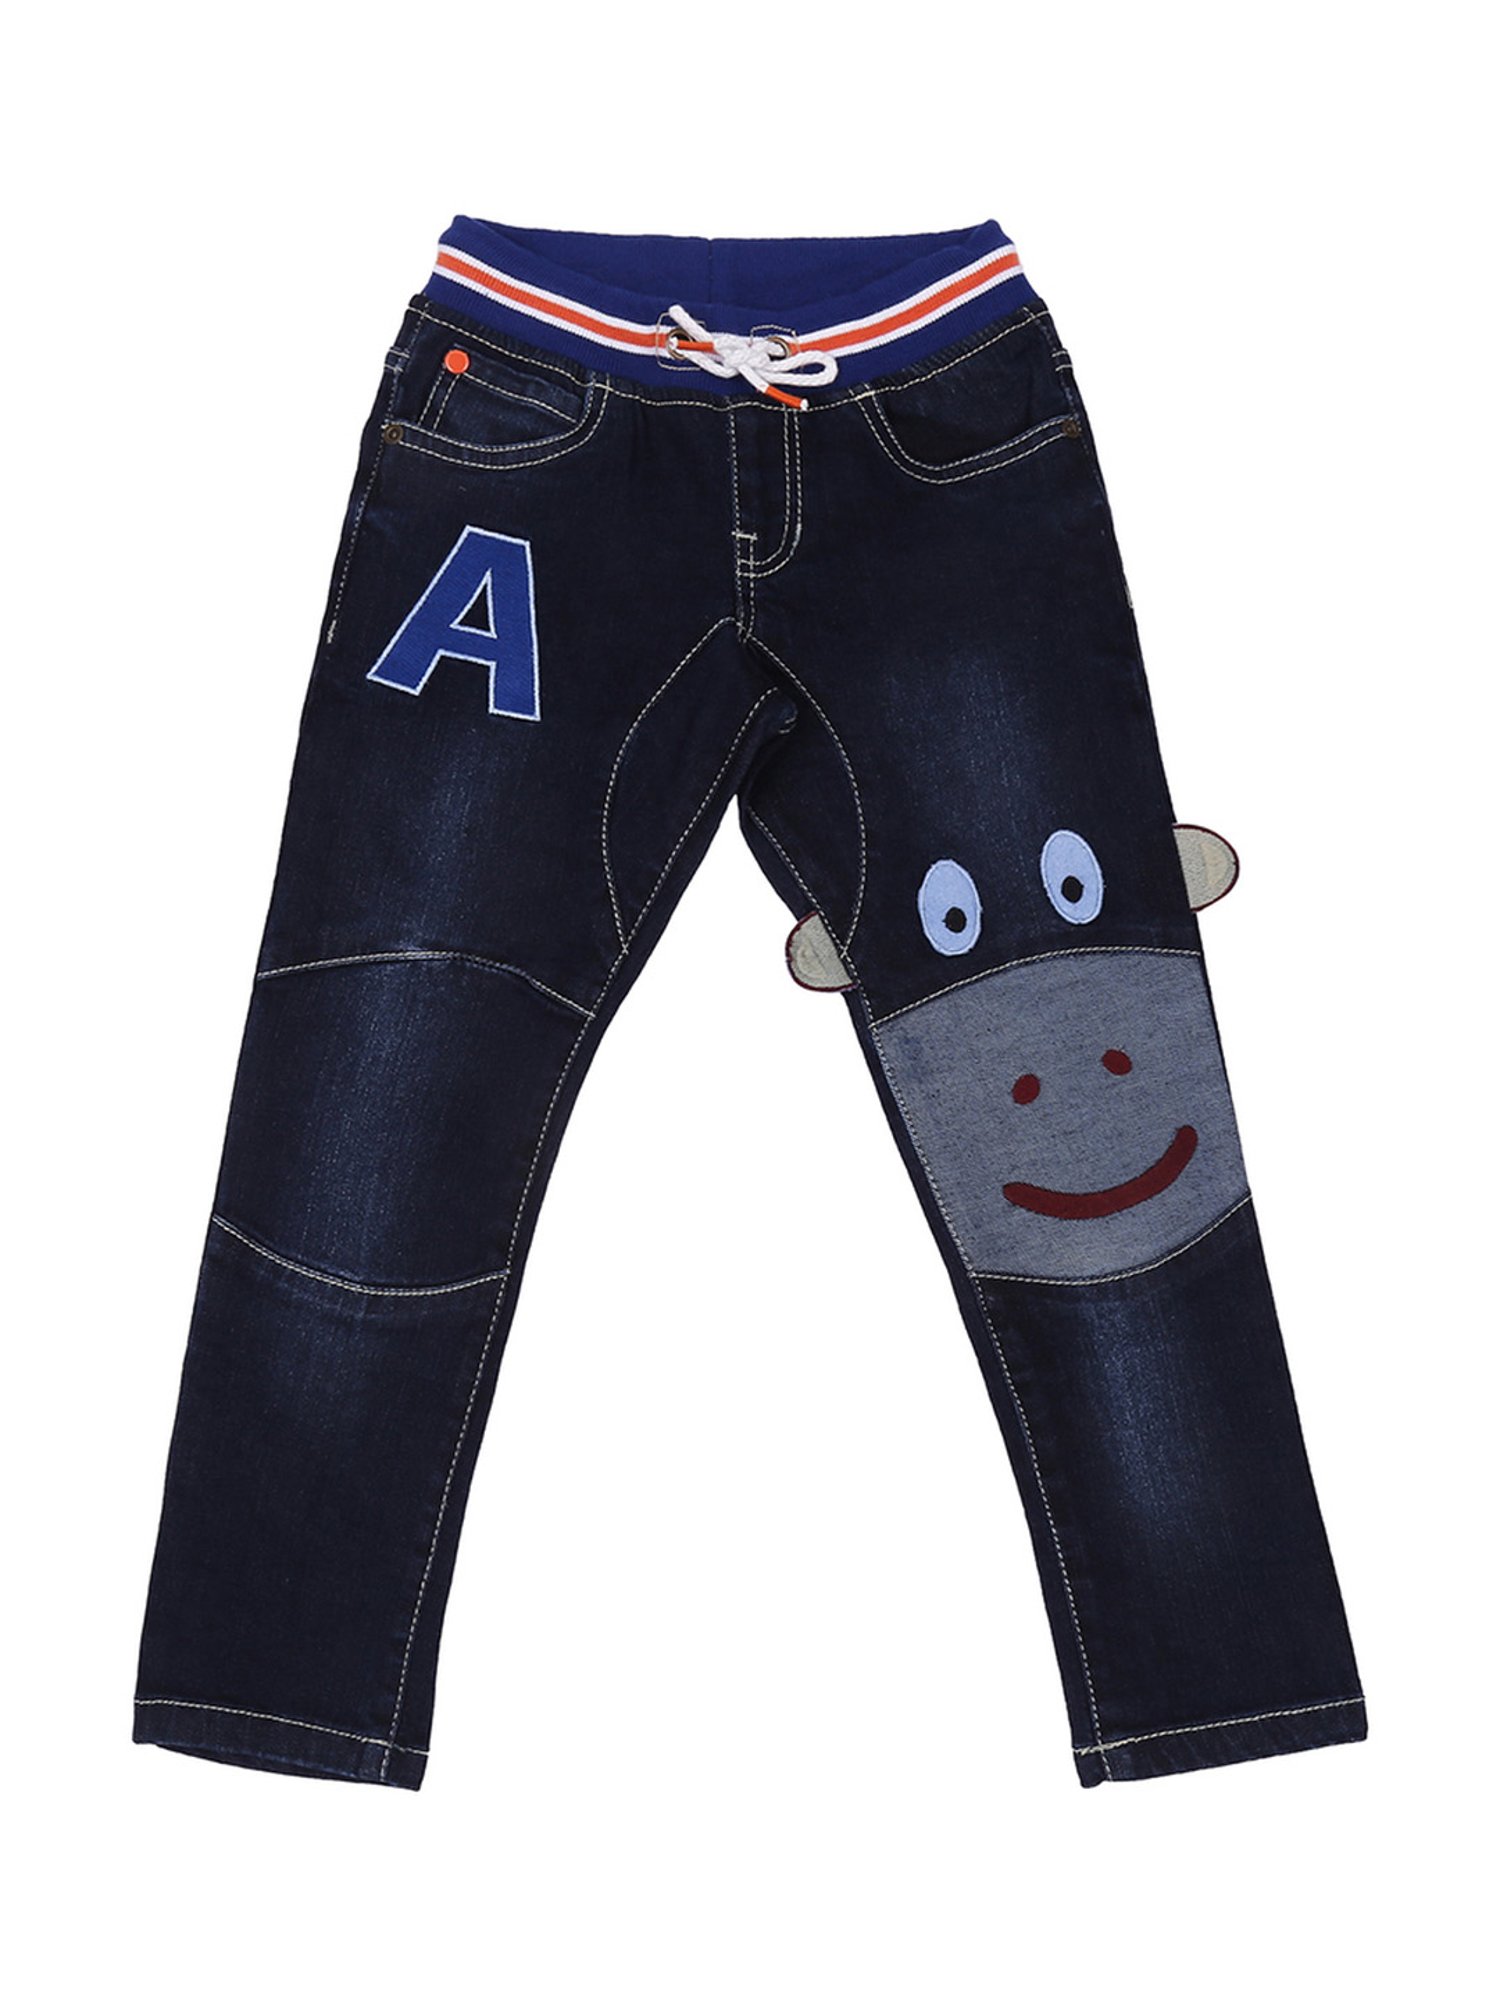 juniors embroidered jeans